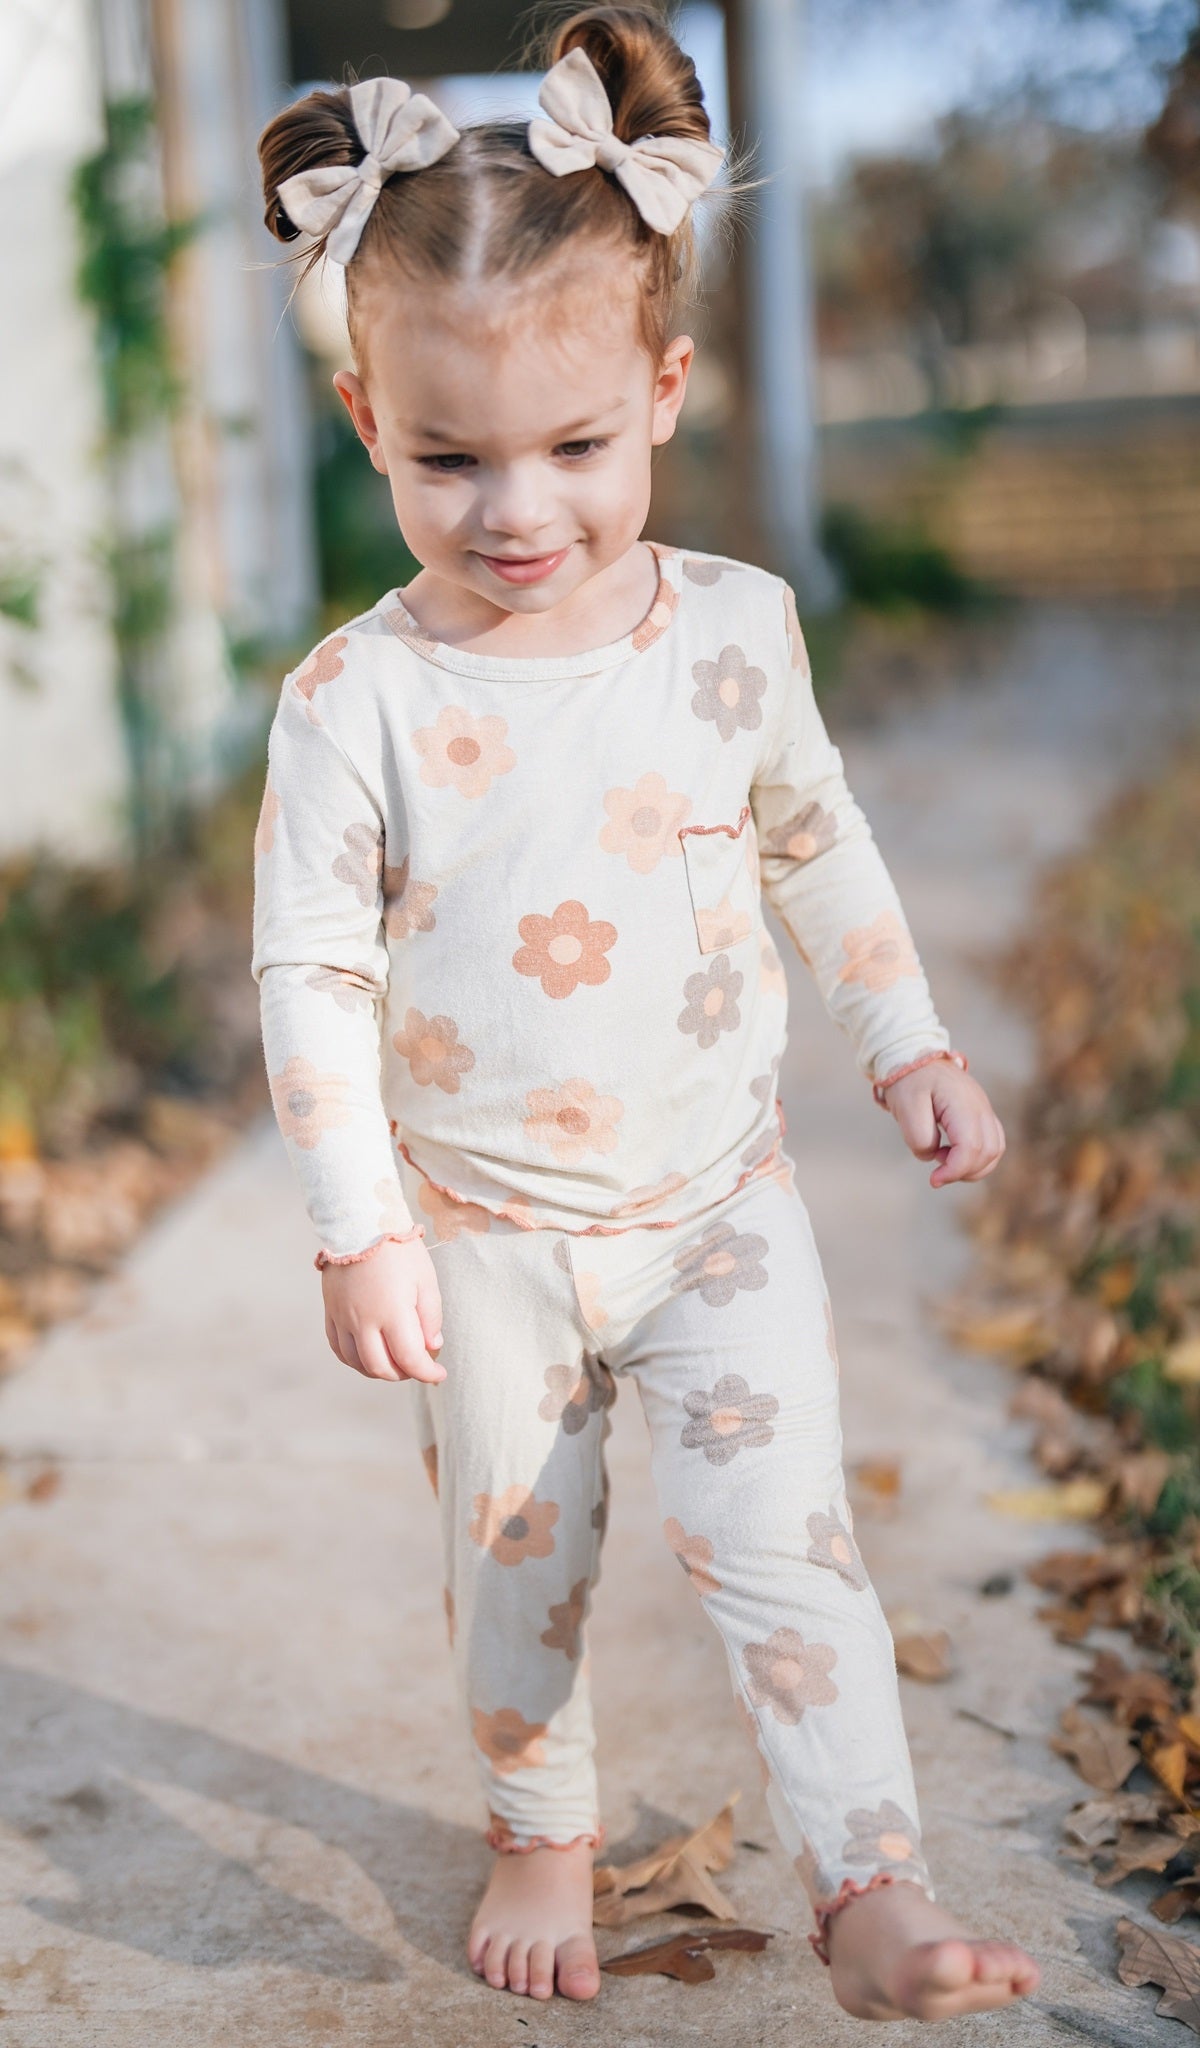 Daisies Charlie Baby 3-Piece Pant PJ worn by little girl walking barefoot.